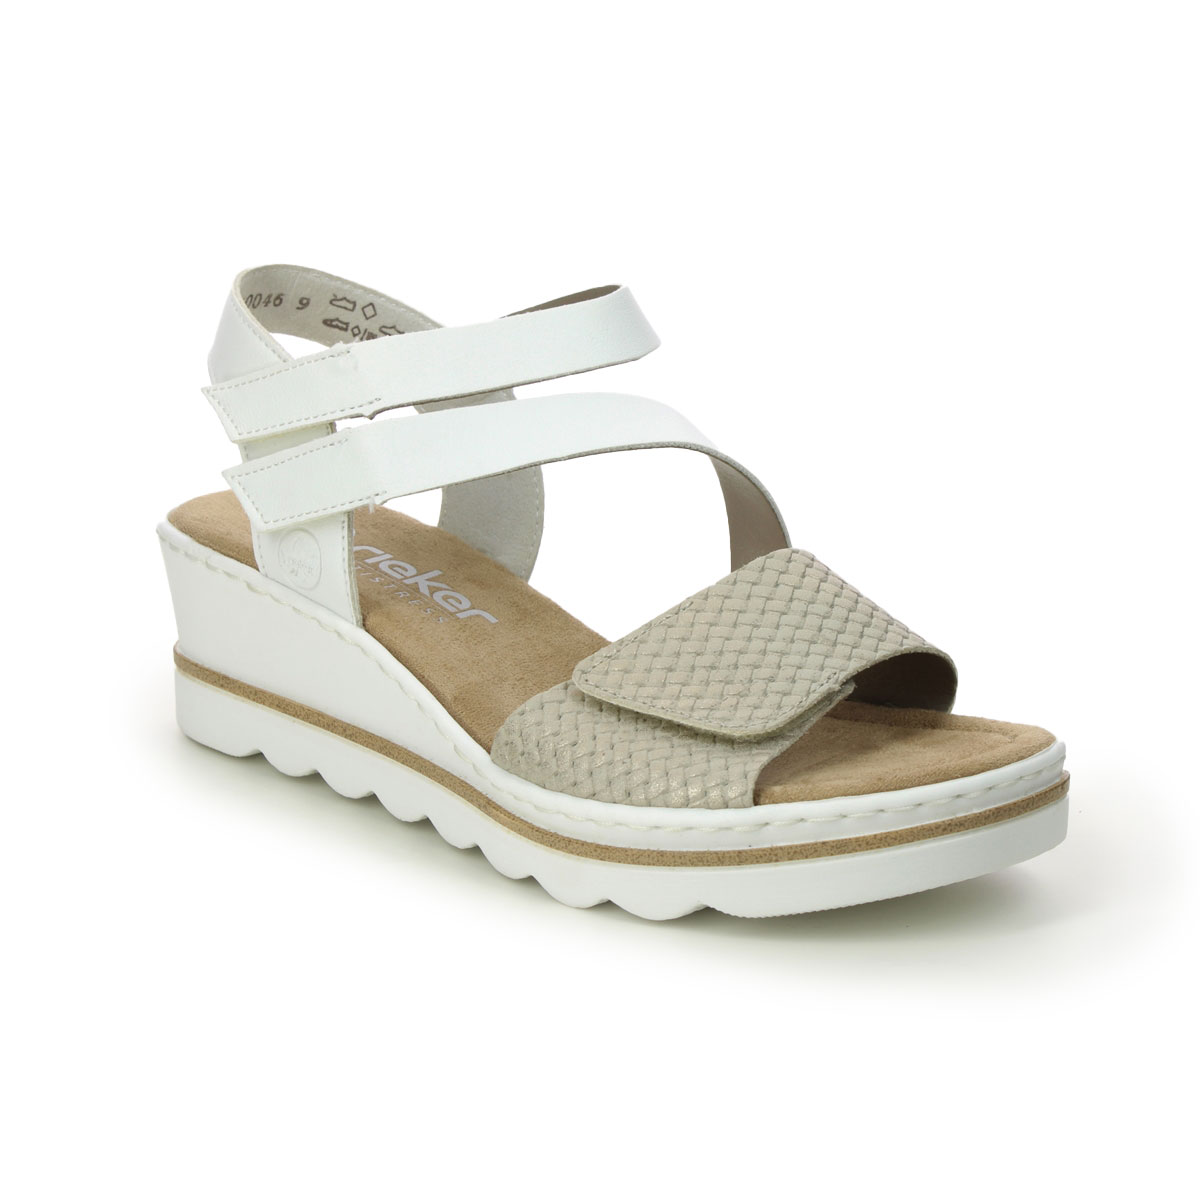 Rieker 67454-80 White Light Gold Womens Wedge Sandals in a Plain Man-made in Size 41